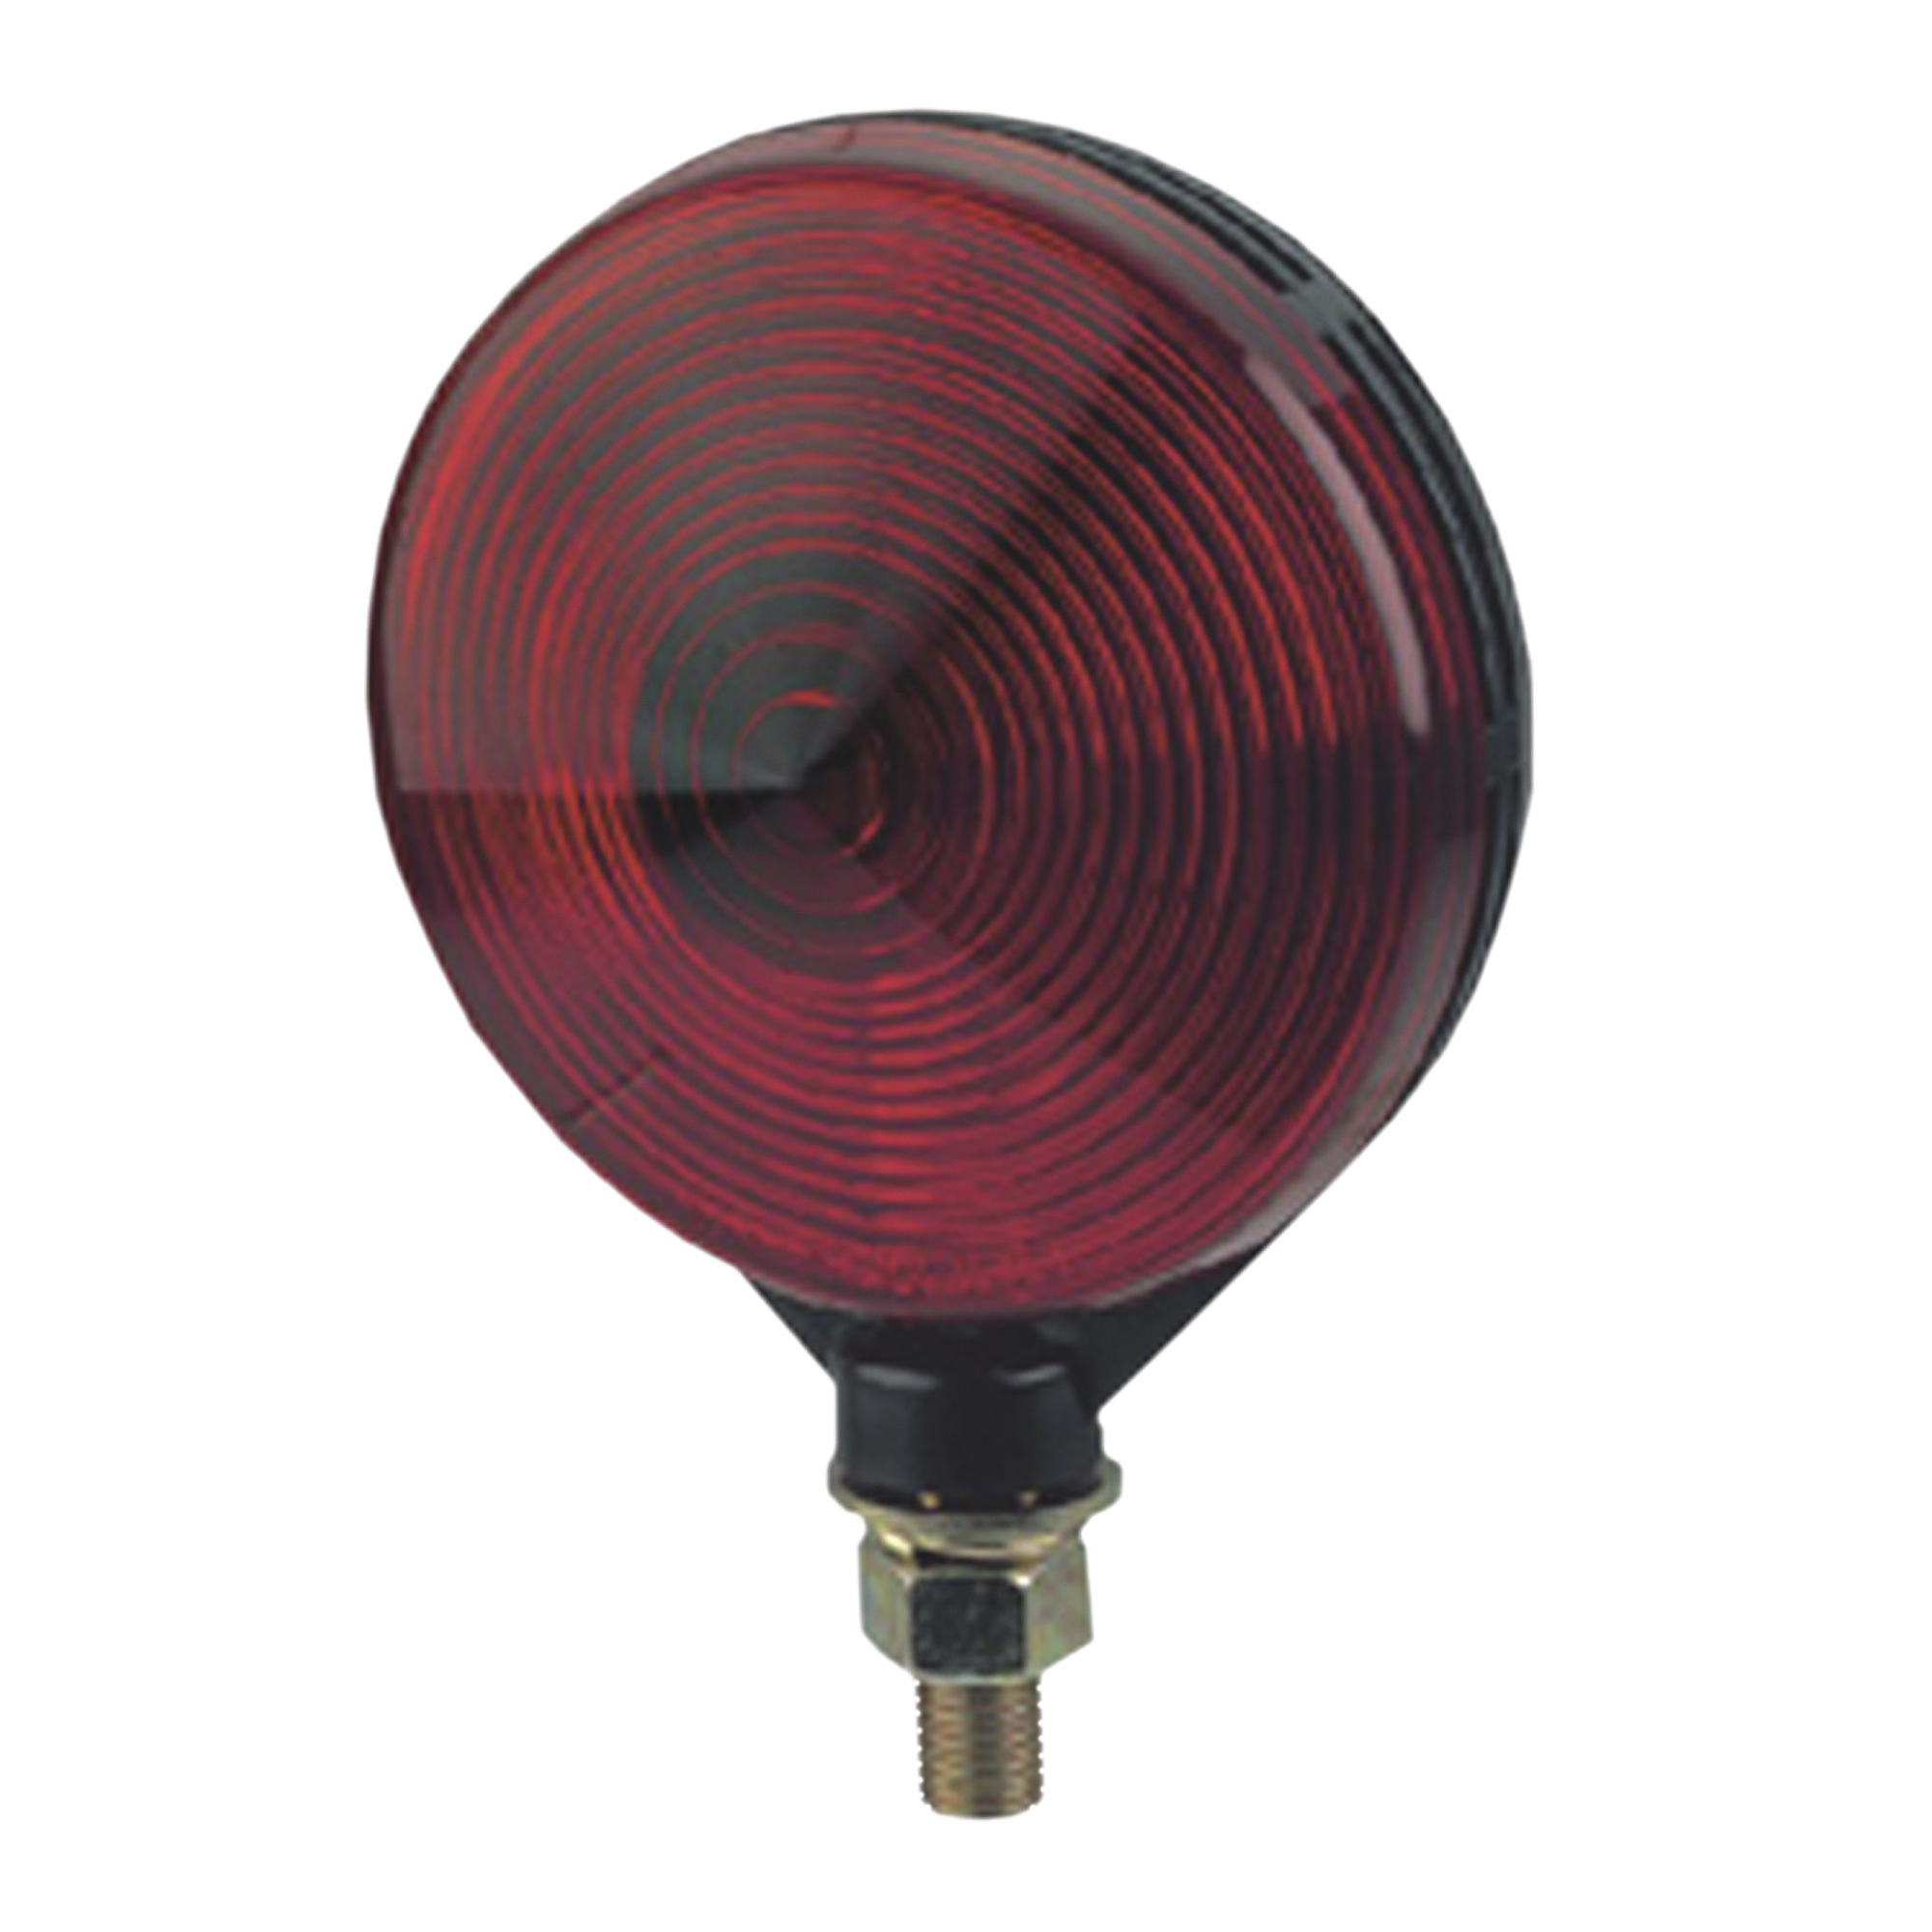 Blazer Dual Faced Stop/Tail/Turn Light with Pedestal Mount, Model B567